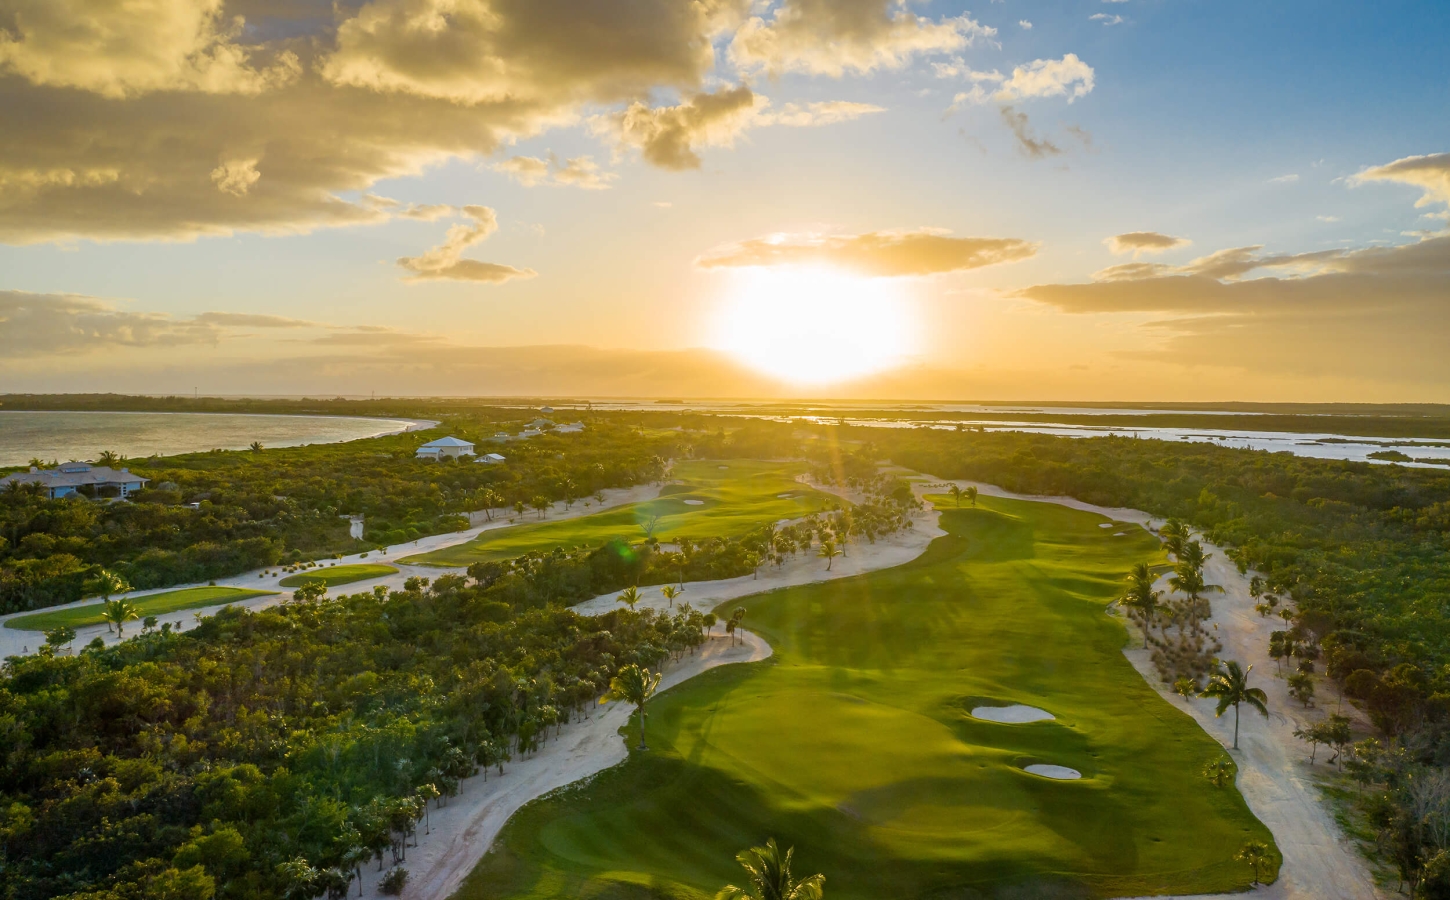 Sunset at The Abaco Club